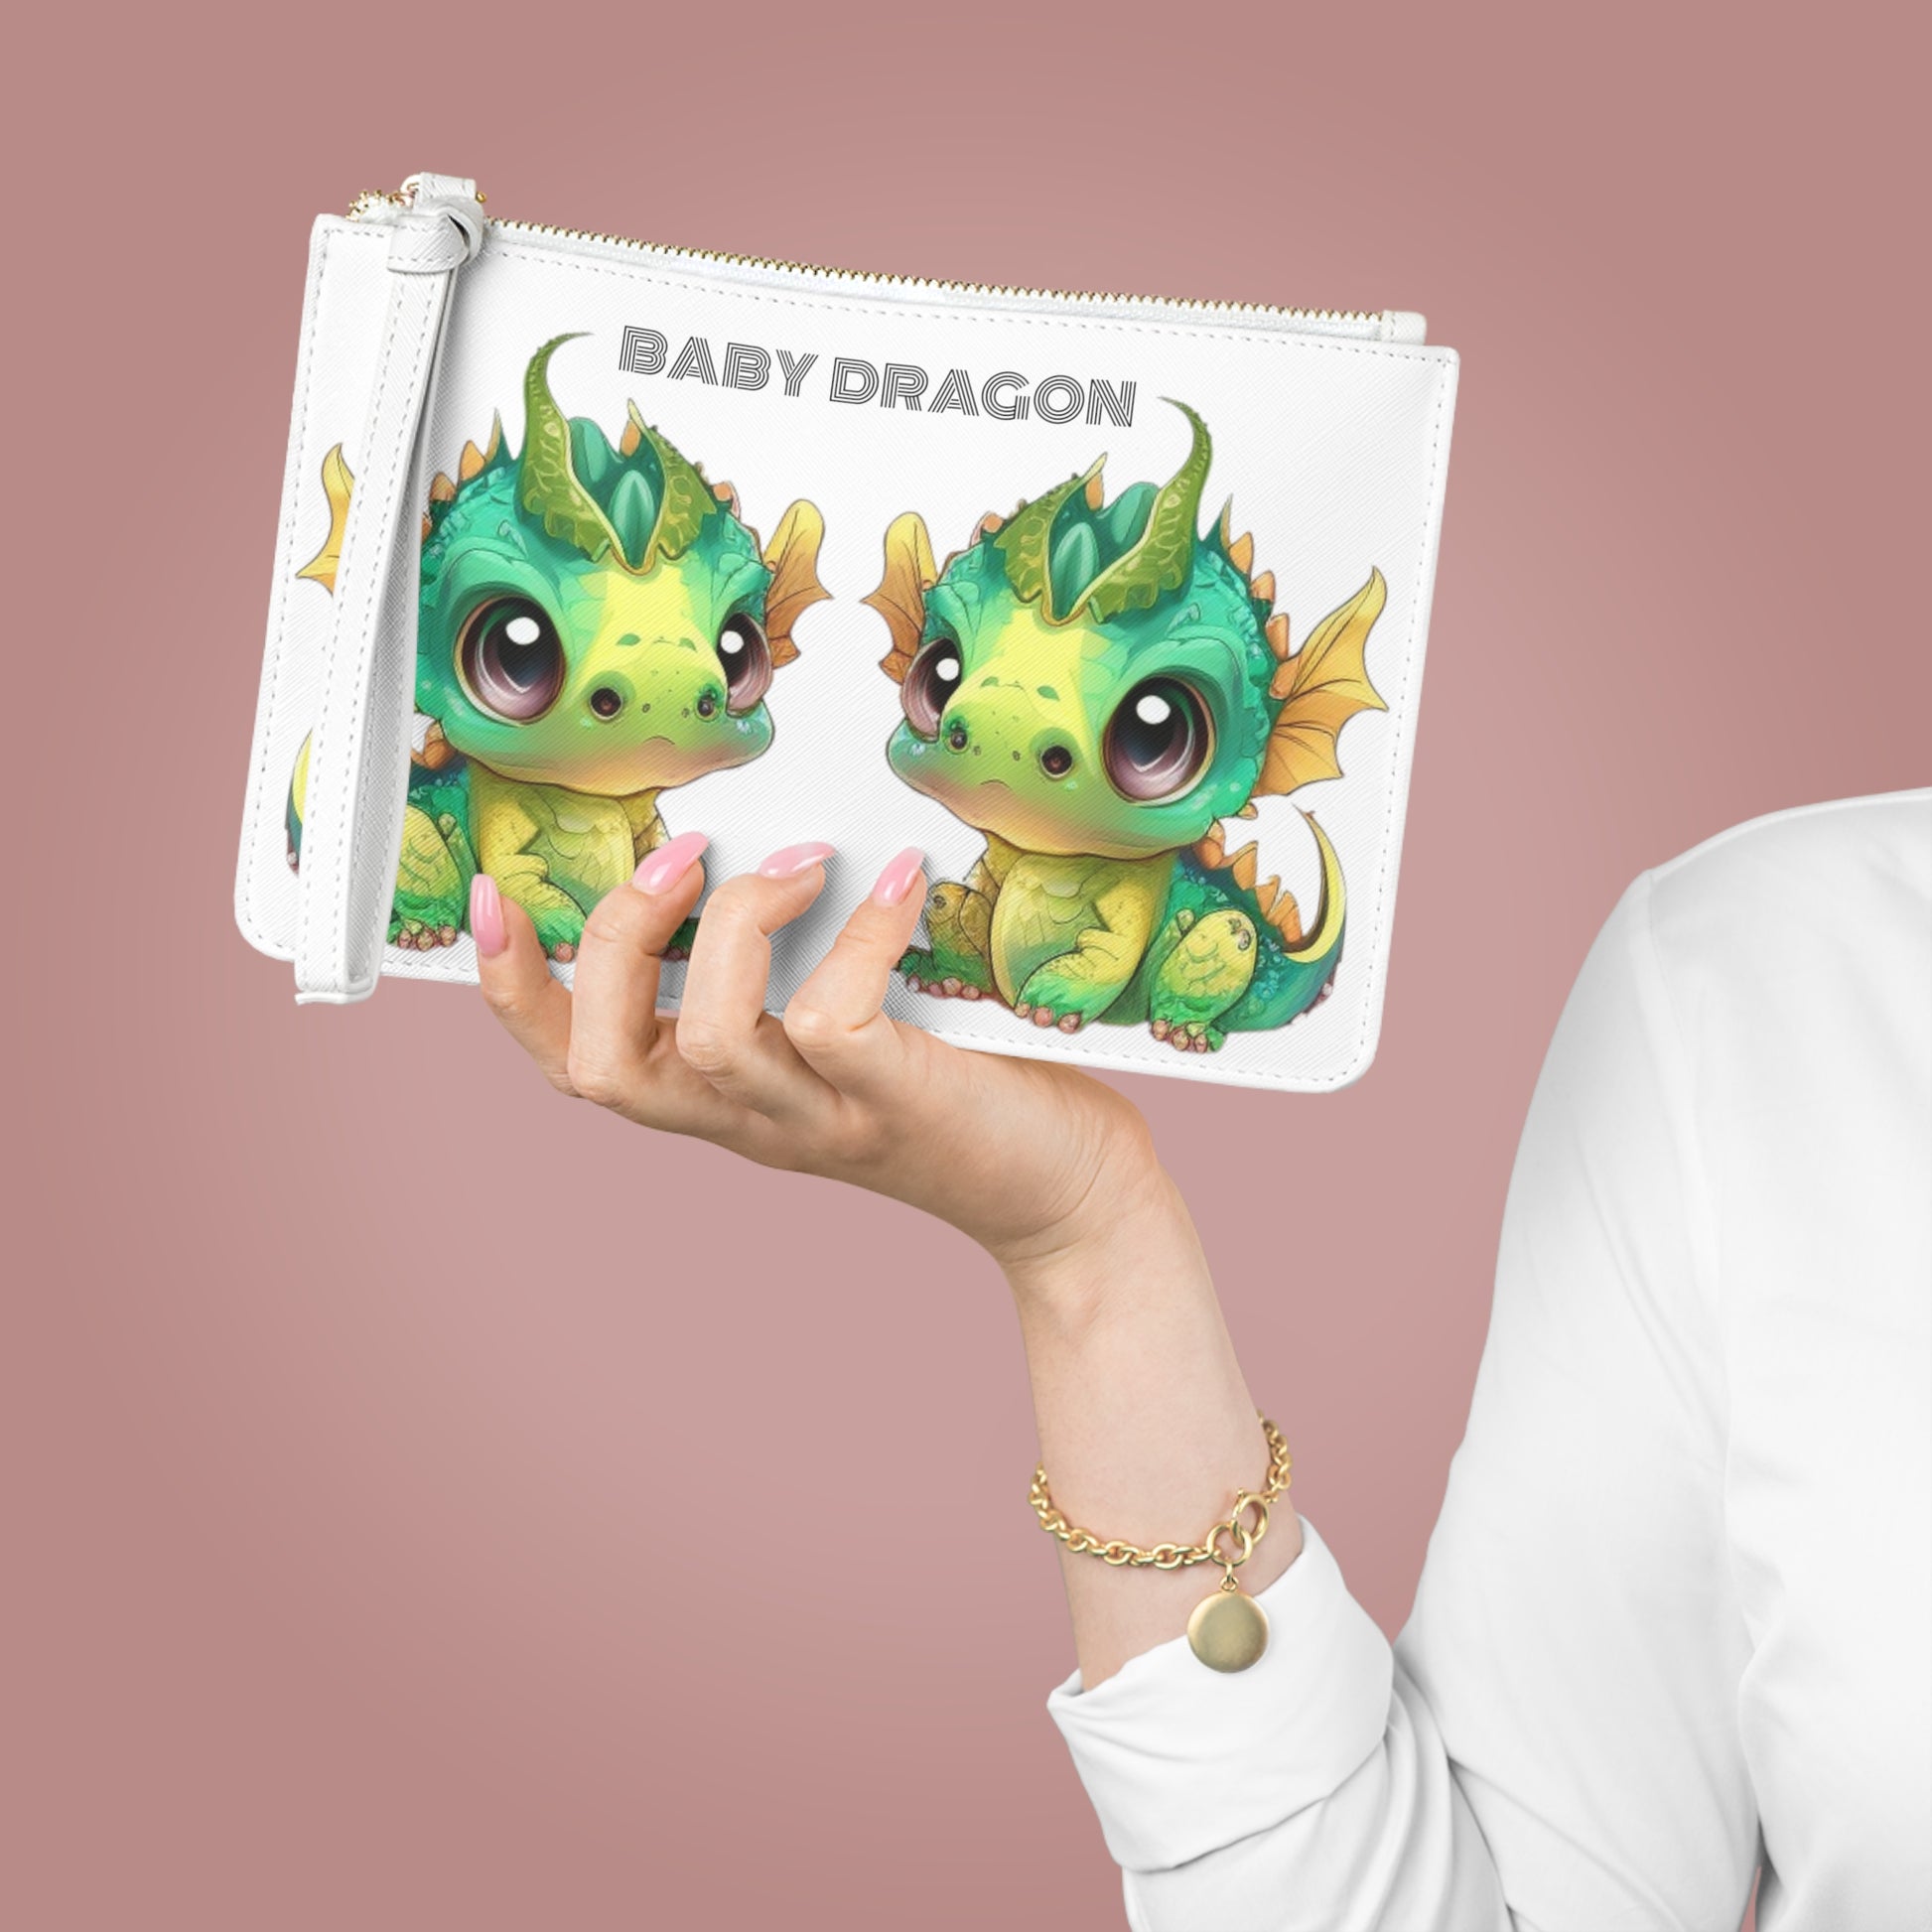 Baby Dragon is the decorative text above 2 darling baby Bobby dragons facing each other - Bobby is in greens and yellows with a little green horn popping out of his cute head - on a white vegan leather sofino patterned clutch bag with a loop white handle and gold zipper - excellent quality!